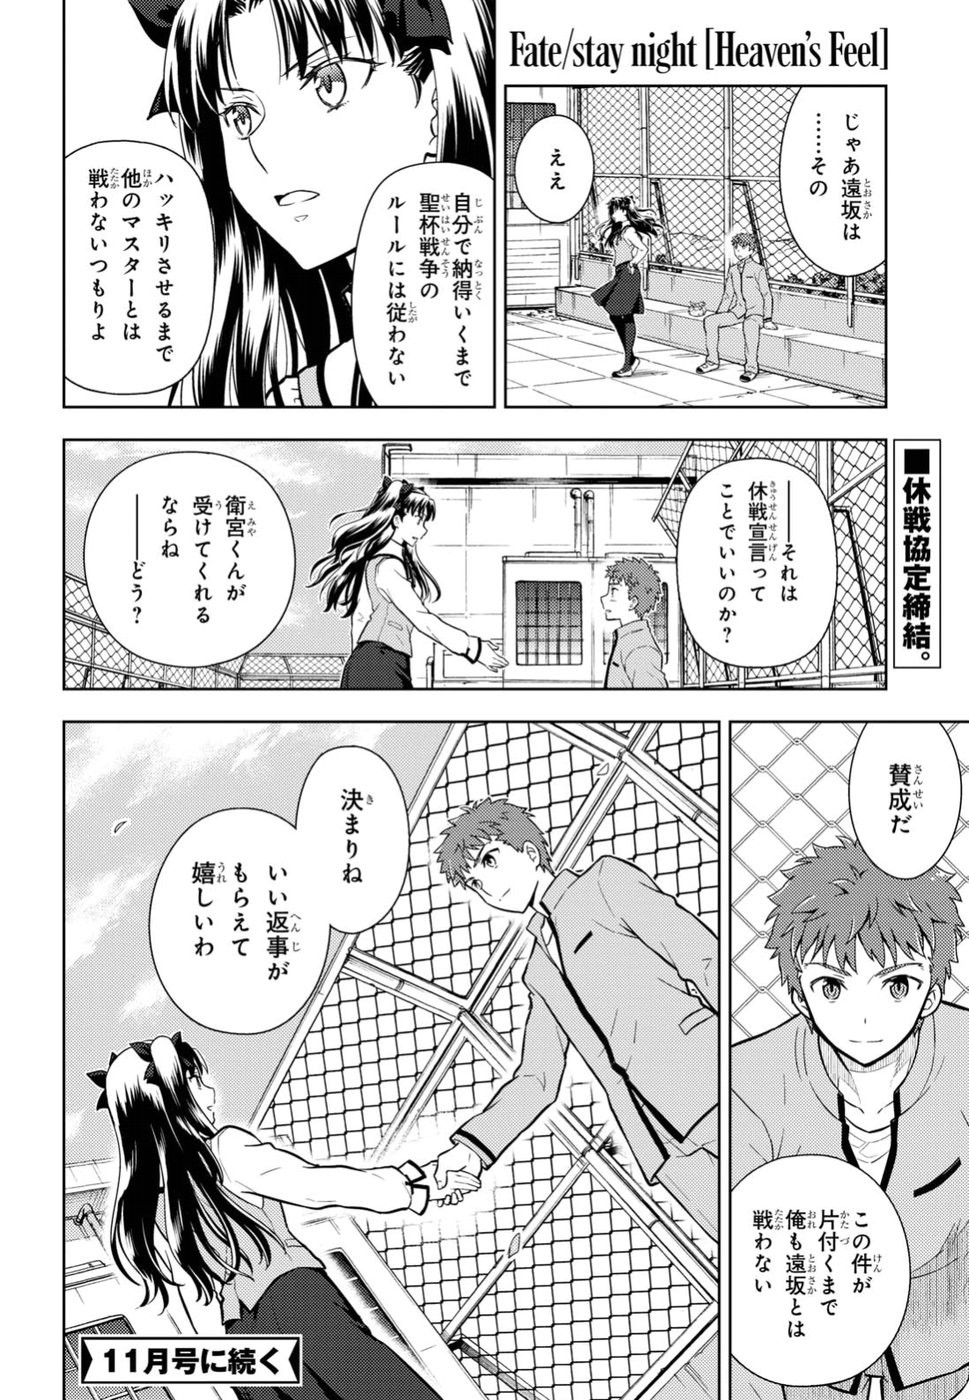 Fate/Stay night Heaven's Feel - Chapter 41 - Page 34